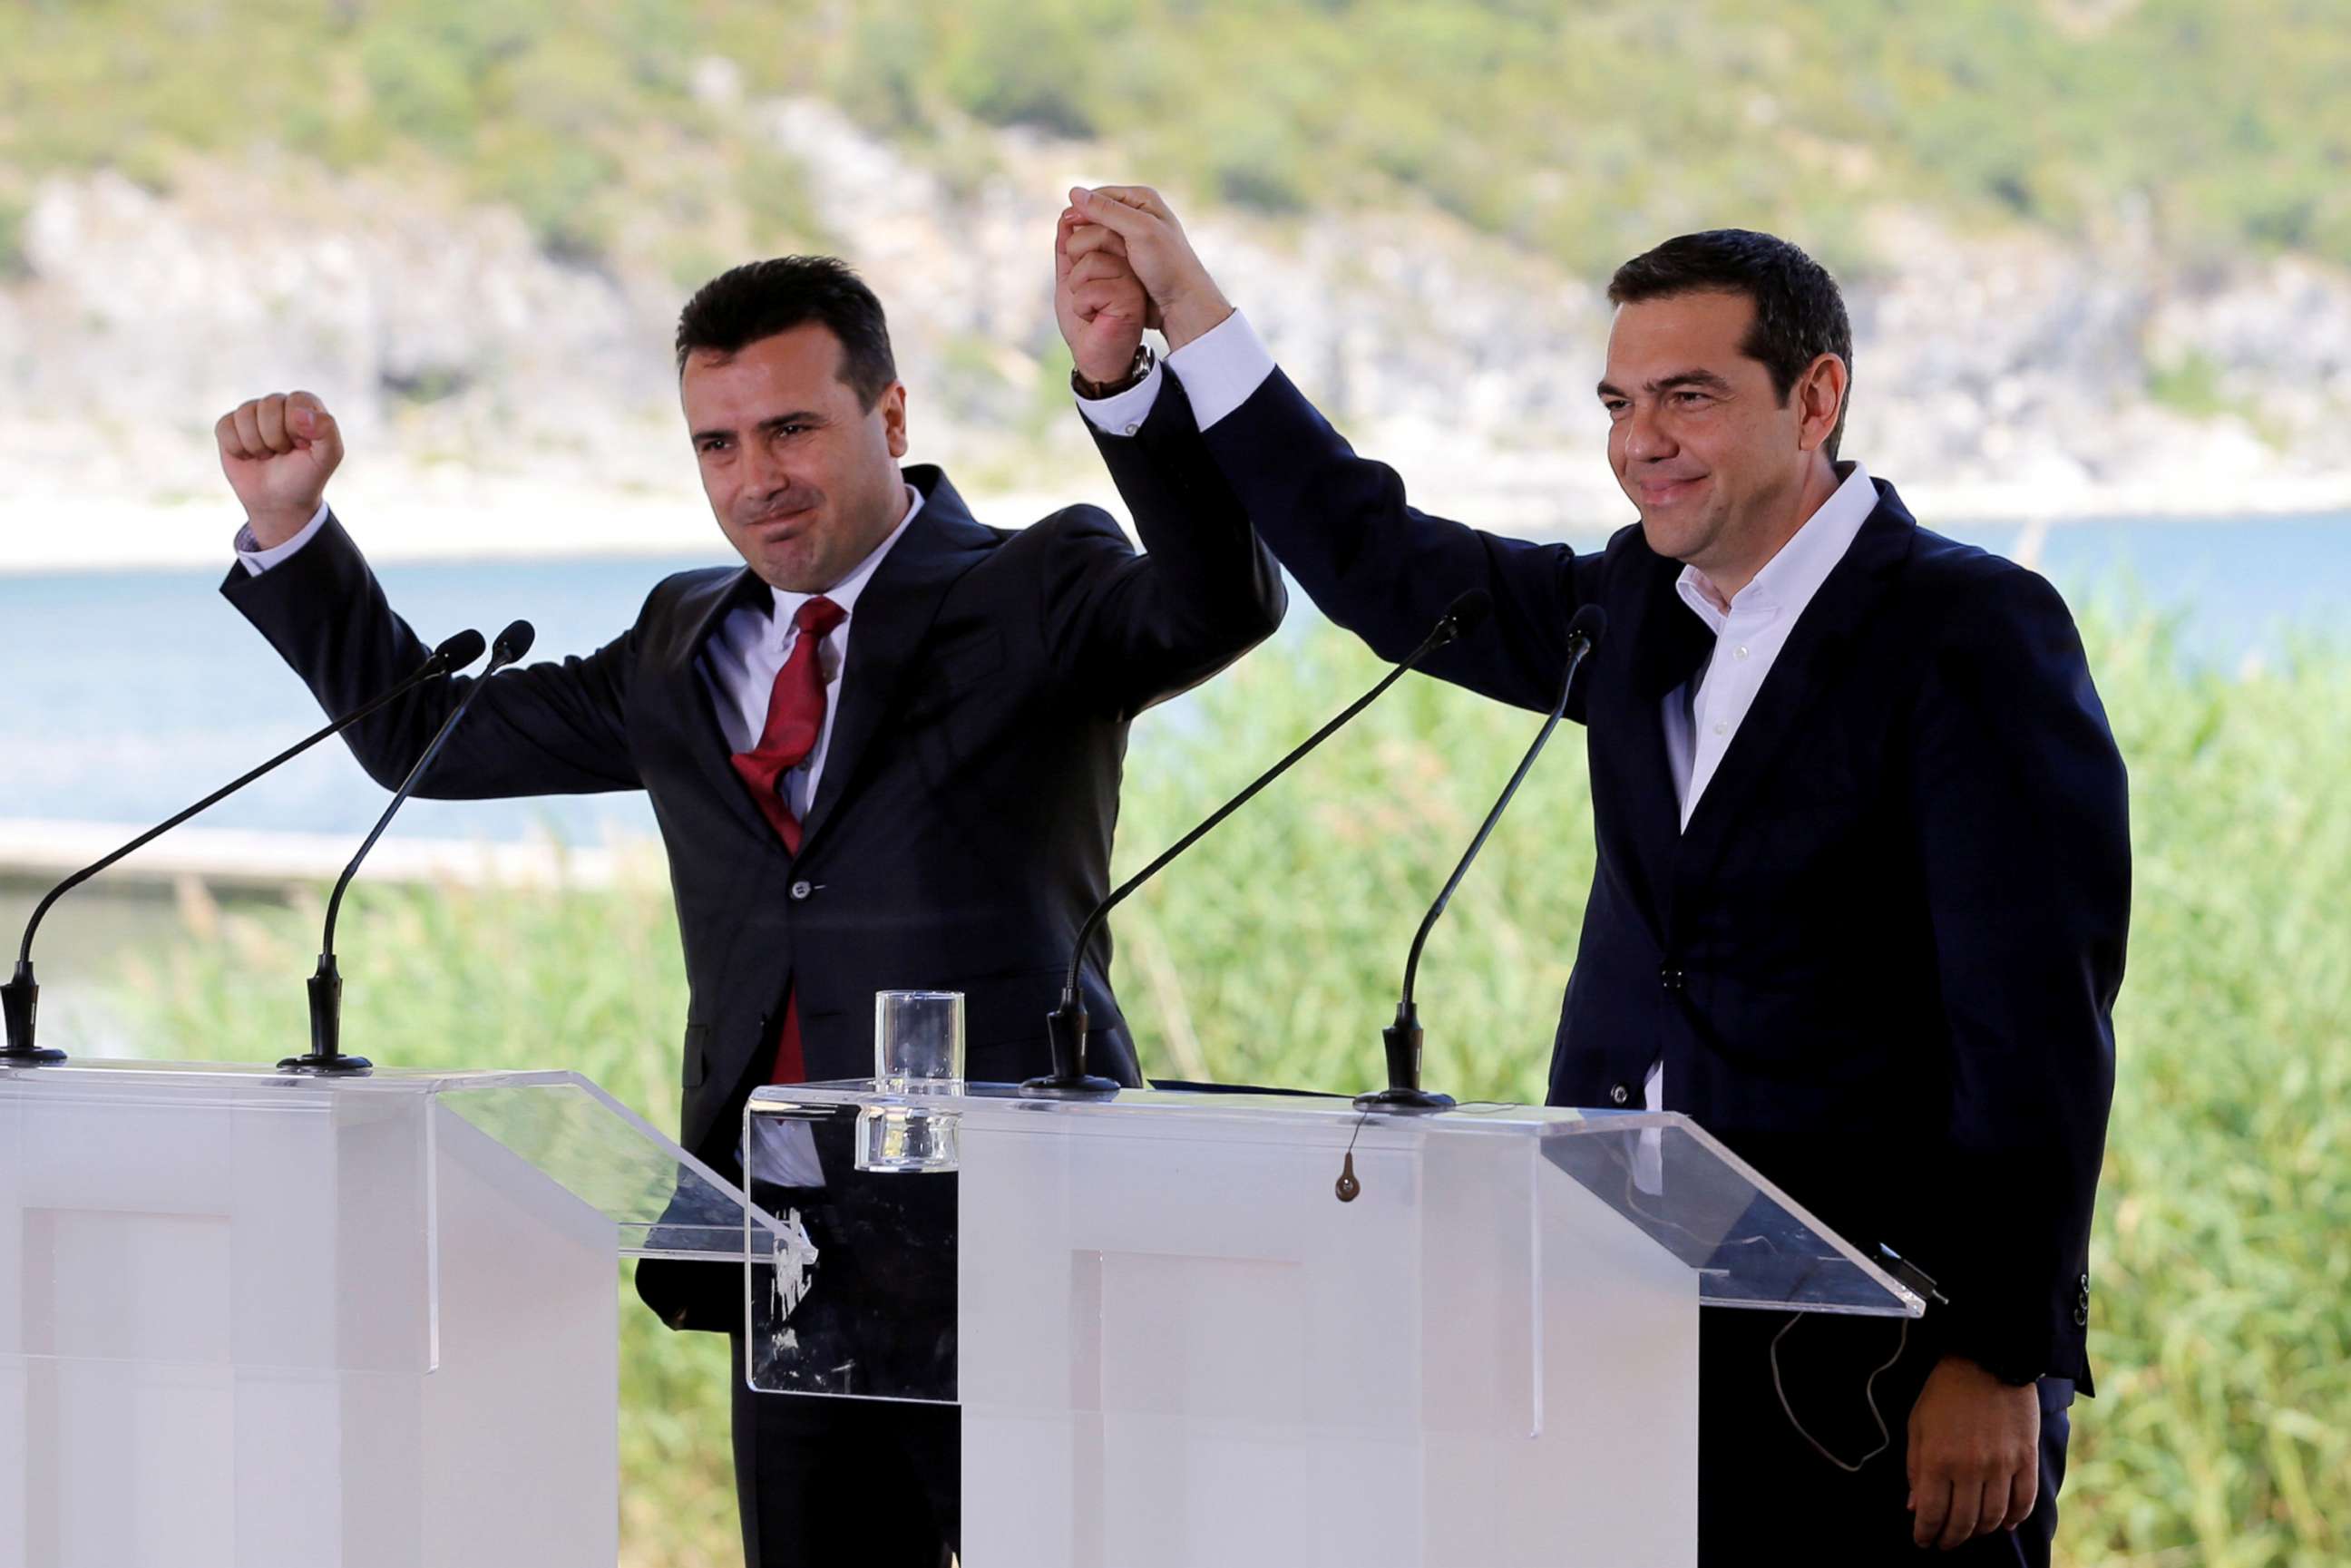 PHOTO: Greek Prime Minister Alexis Tsipras and Macedonian Prime Minister Zoran Zaev gesture before the signing of an accord to settle a long dispute over the former Yugoslav republic's name in the village of Psarades, in Prespes, Greece, June 17, 2018.